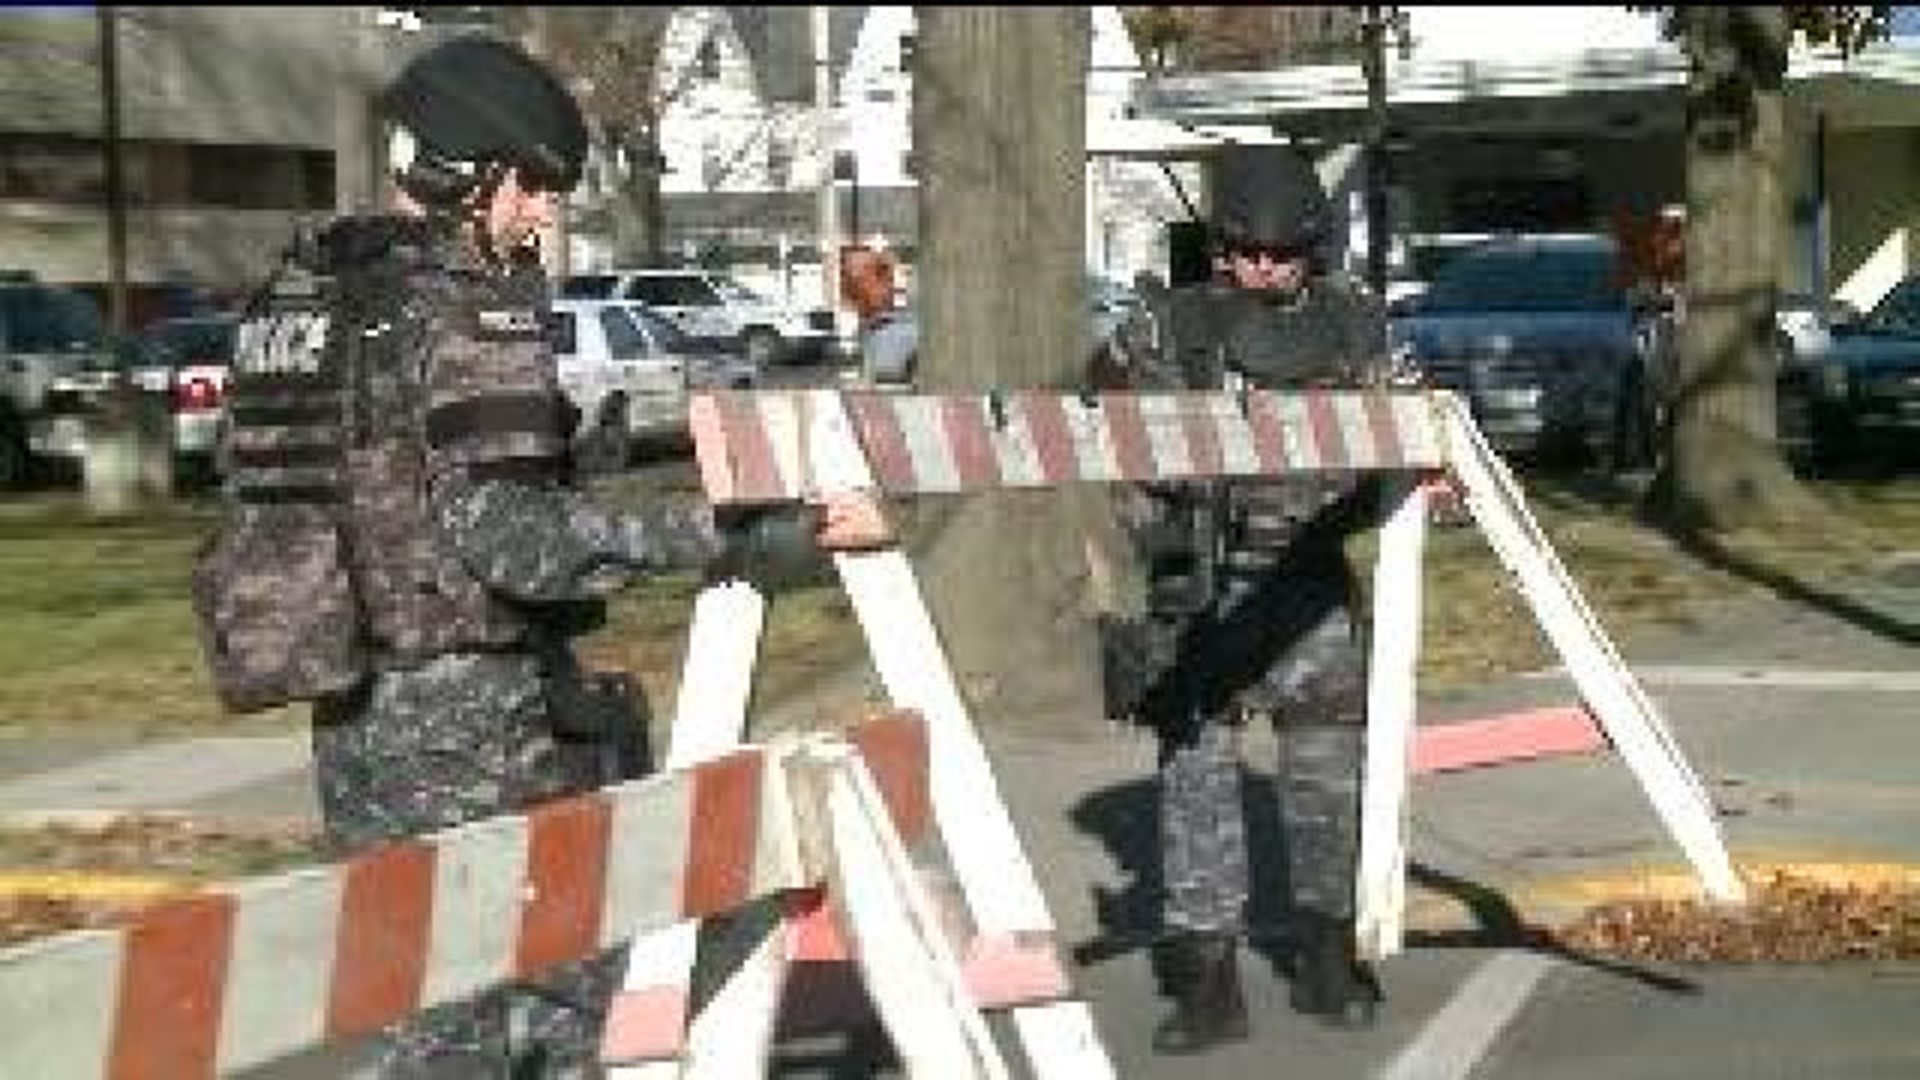 Security on High Alert in Stroudsburg for Hearing